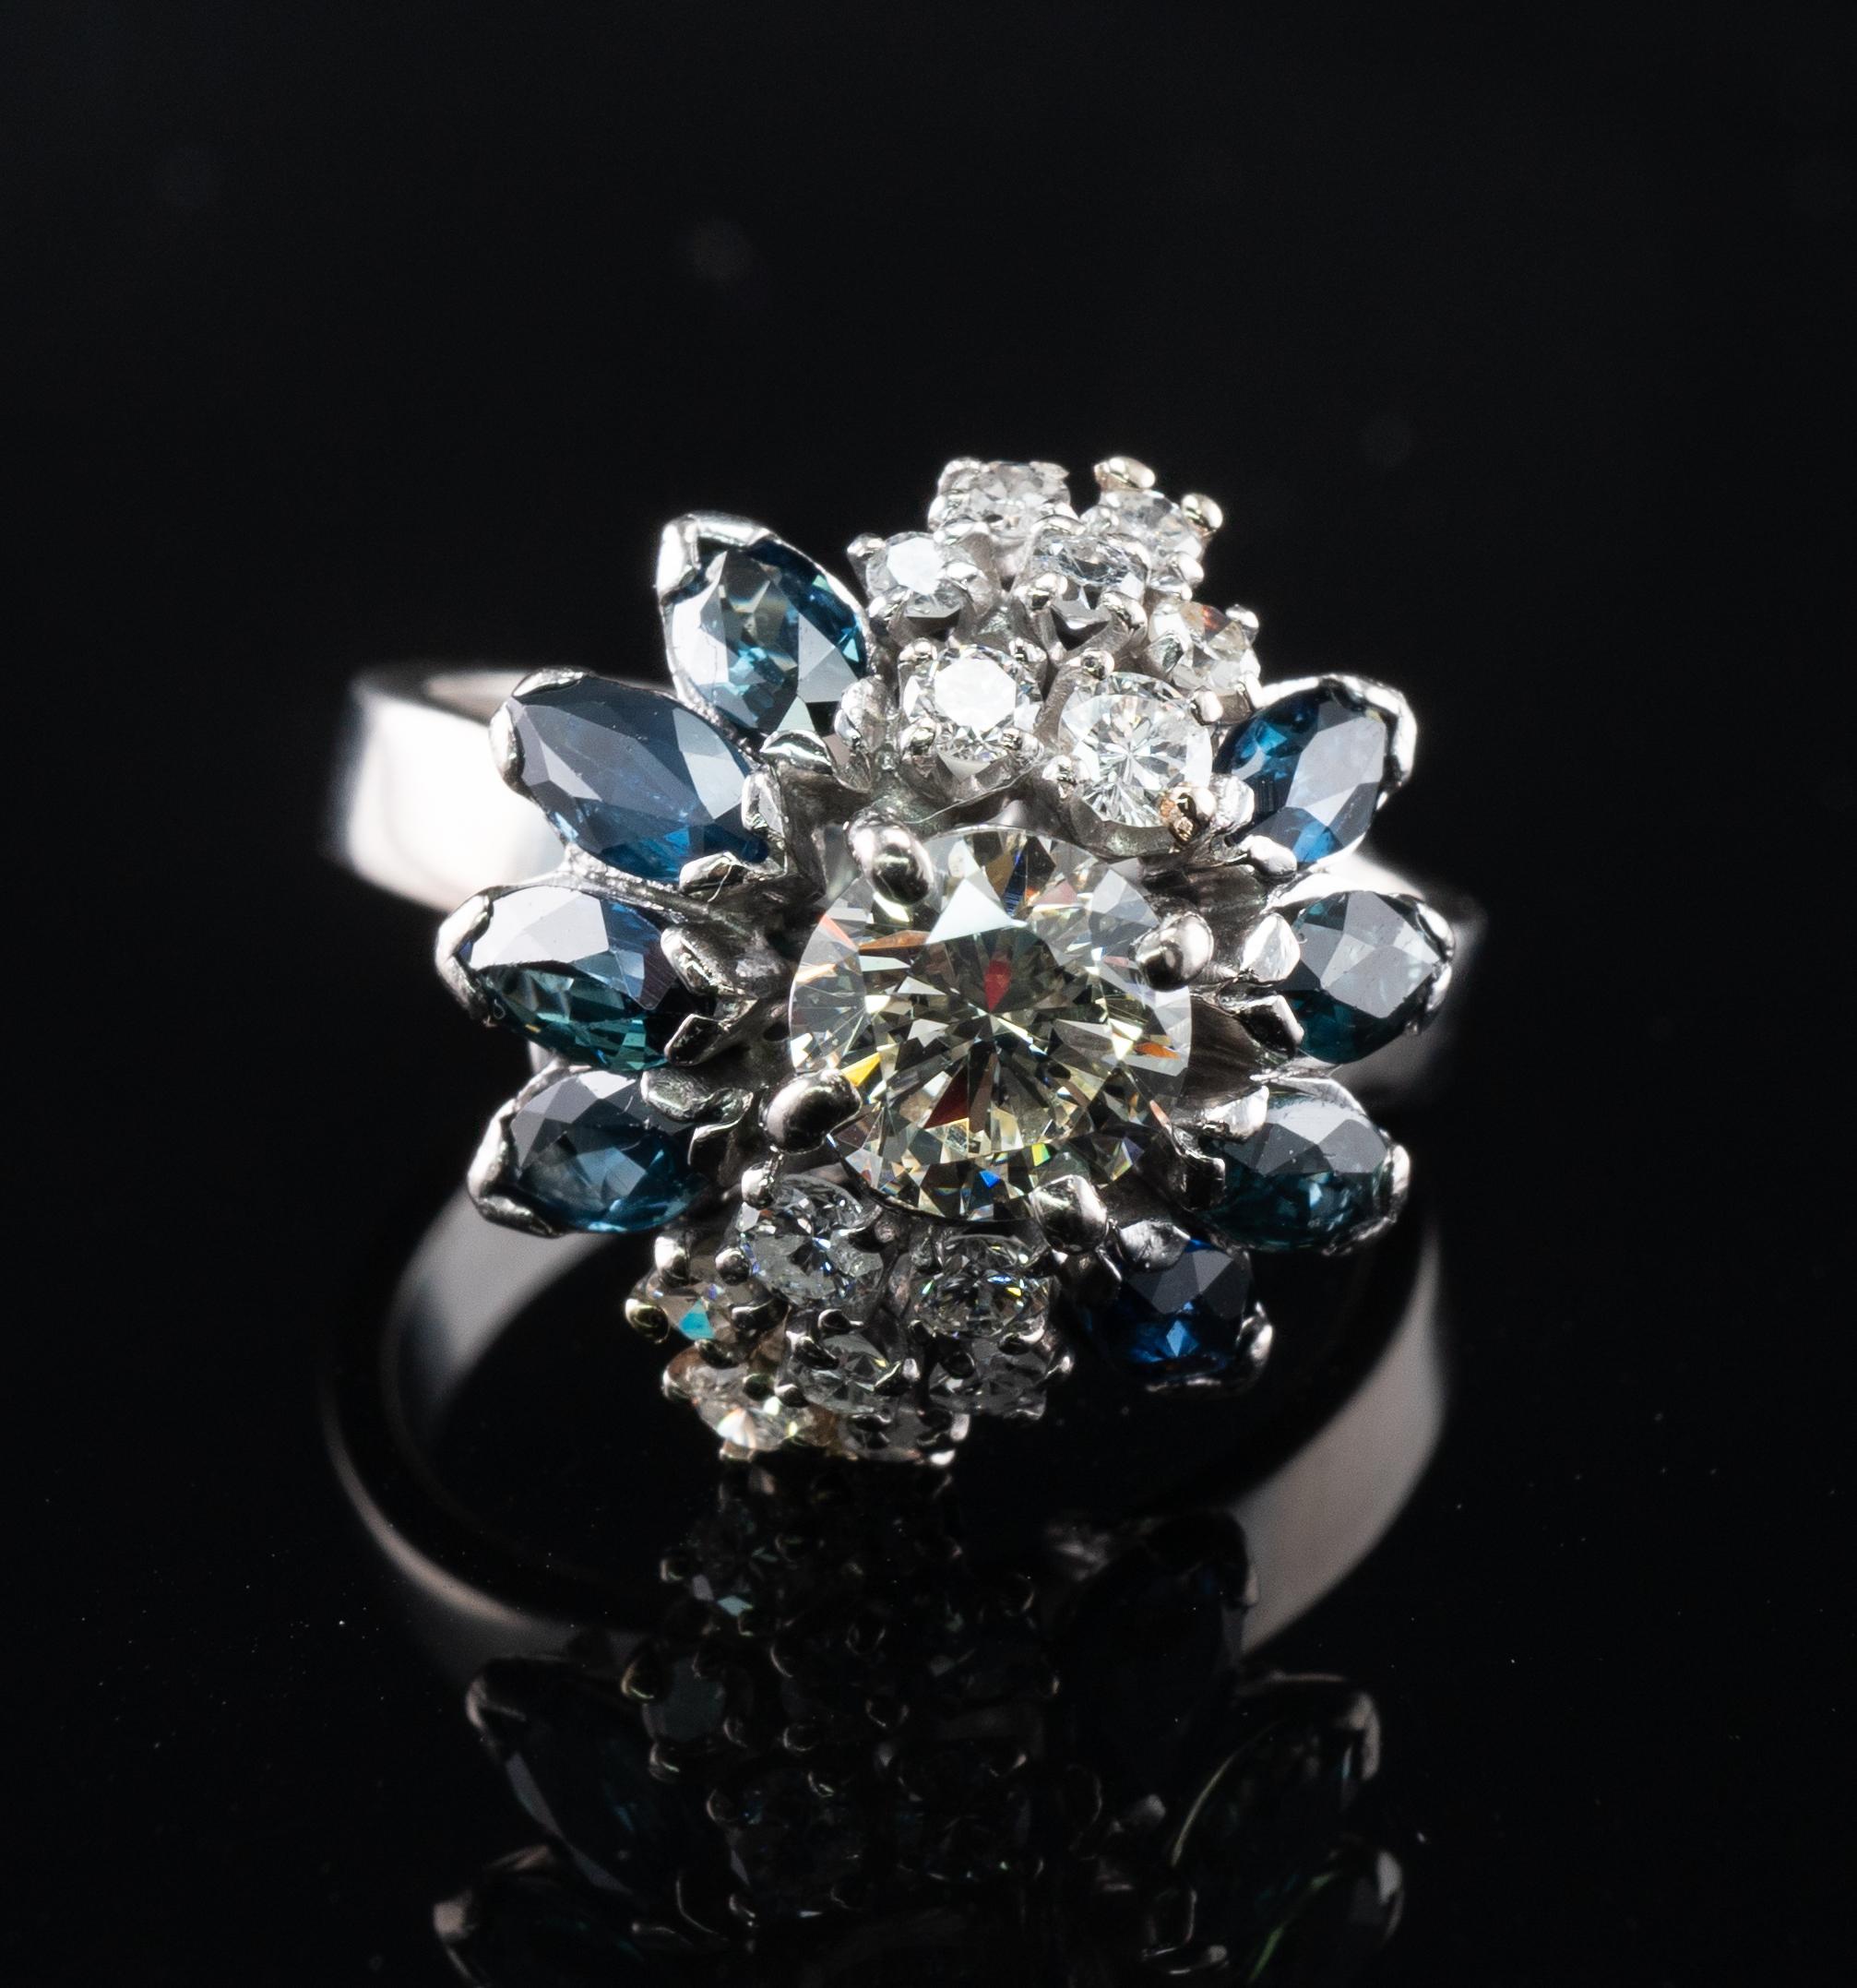 This beautiful vintage ring is finely crafted in solid 18K White gold.
The center round brilliant cut is .90 carat of VS1 clarity and IJ color. 
14 more diamonds total .35 carat of SI1 clarity and H color.
The total diamond weight for the ring is